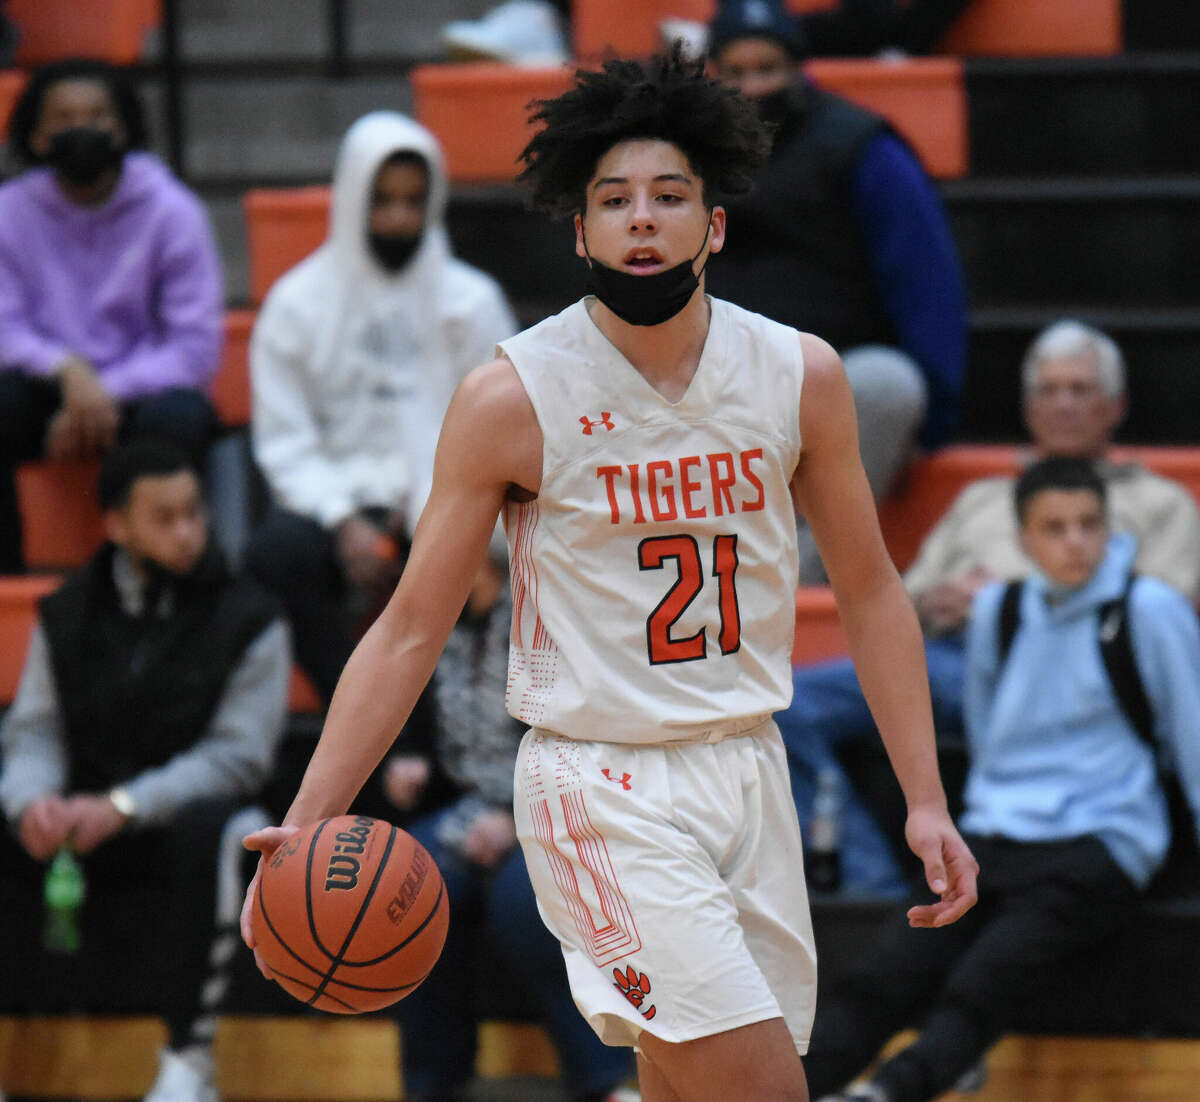 Edwardsville's Isayah Kloster scored a career-high 17 points in a win Friday over Belleville West in Belleville.